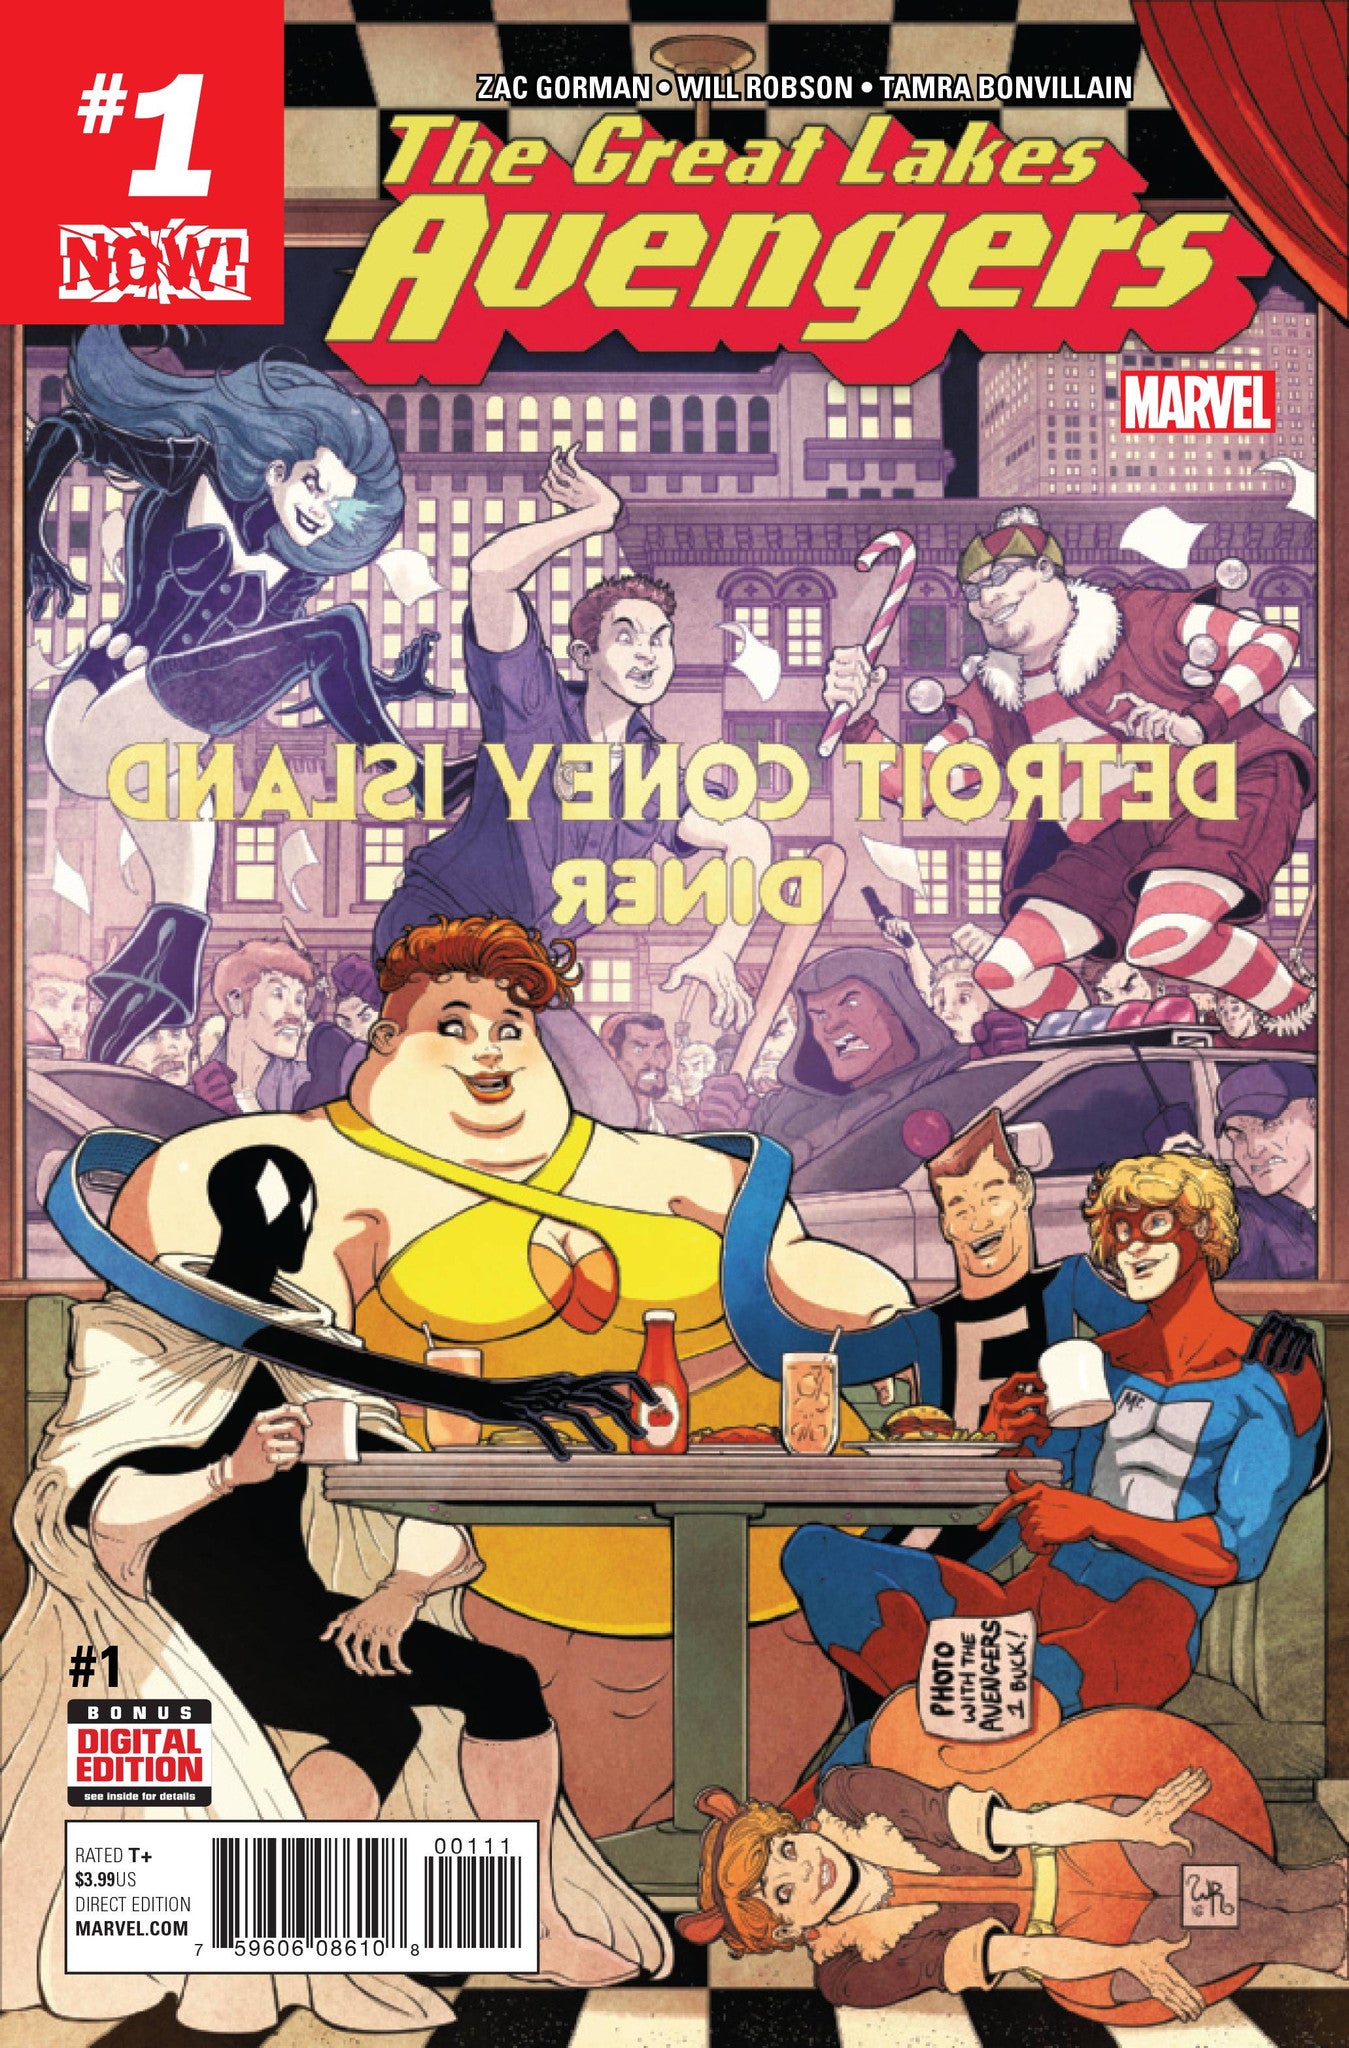 GREAT LAKES AVENGERS #1 NOW COVER